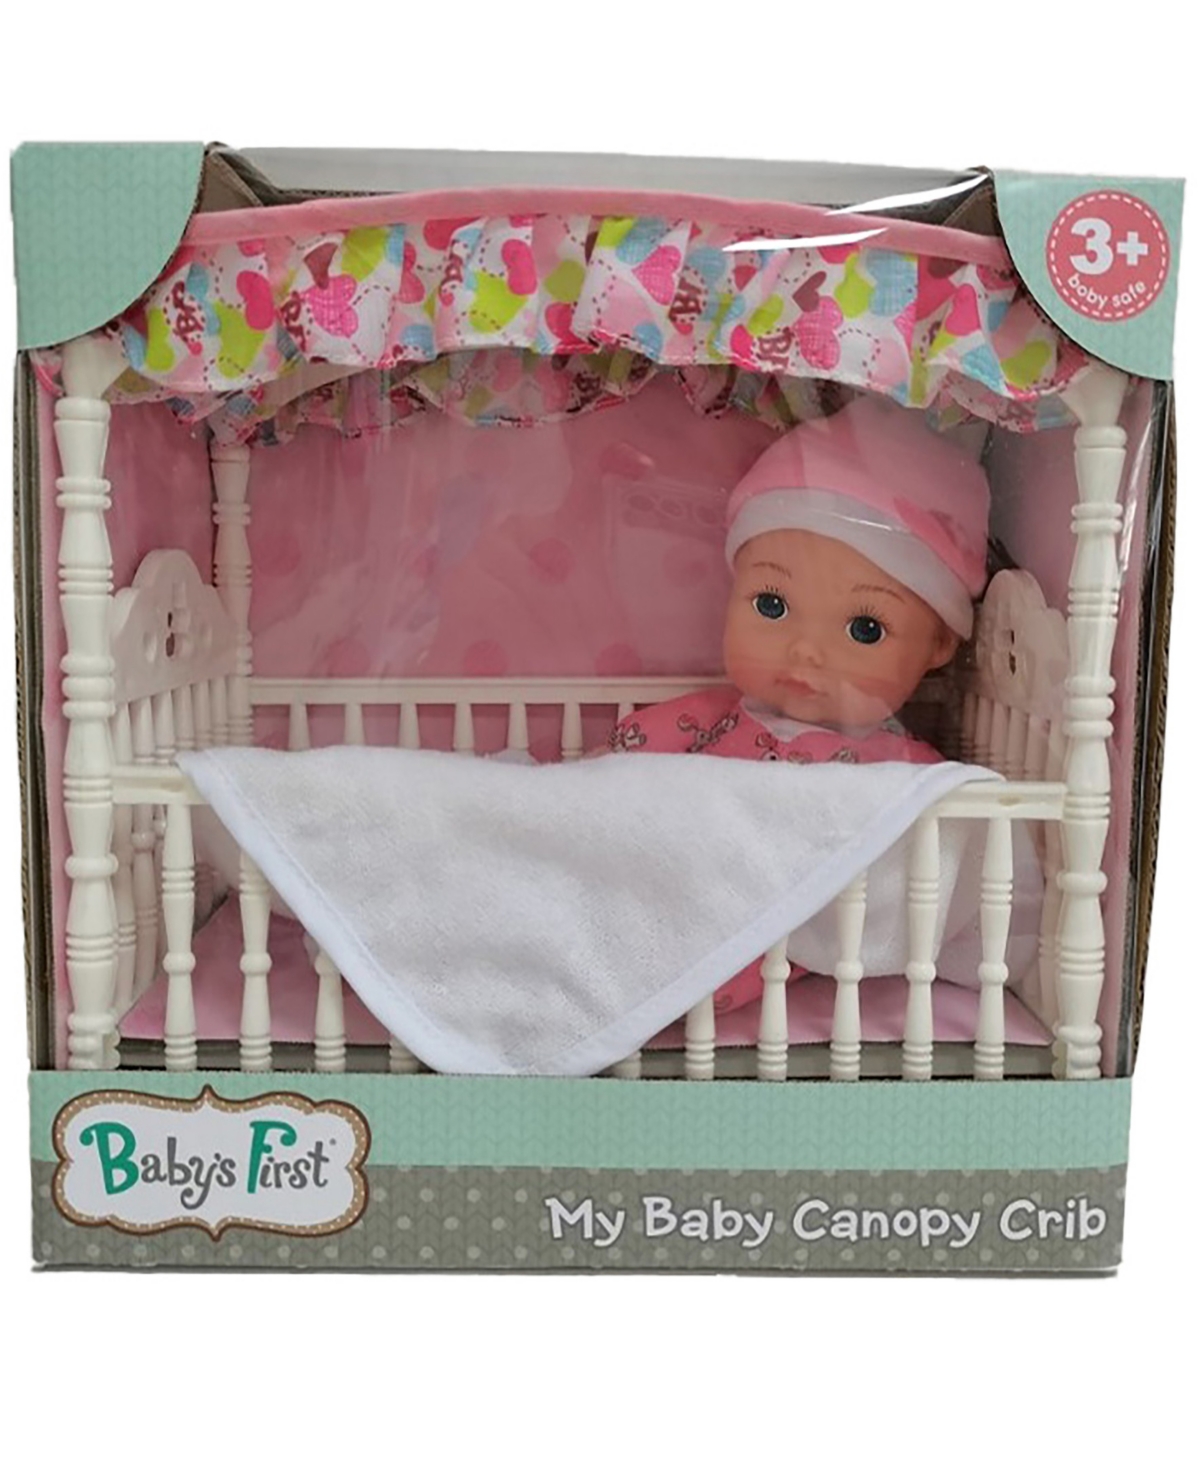 Baby's First By Nemcor Babies' Canopy Crib With Toy Doll In Pink